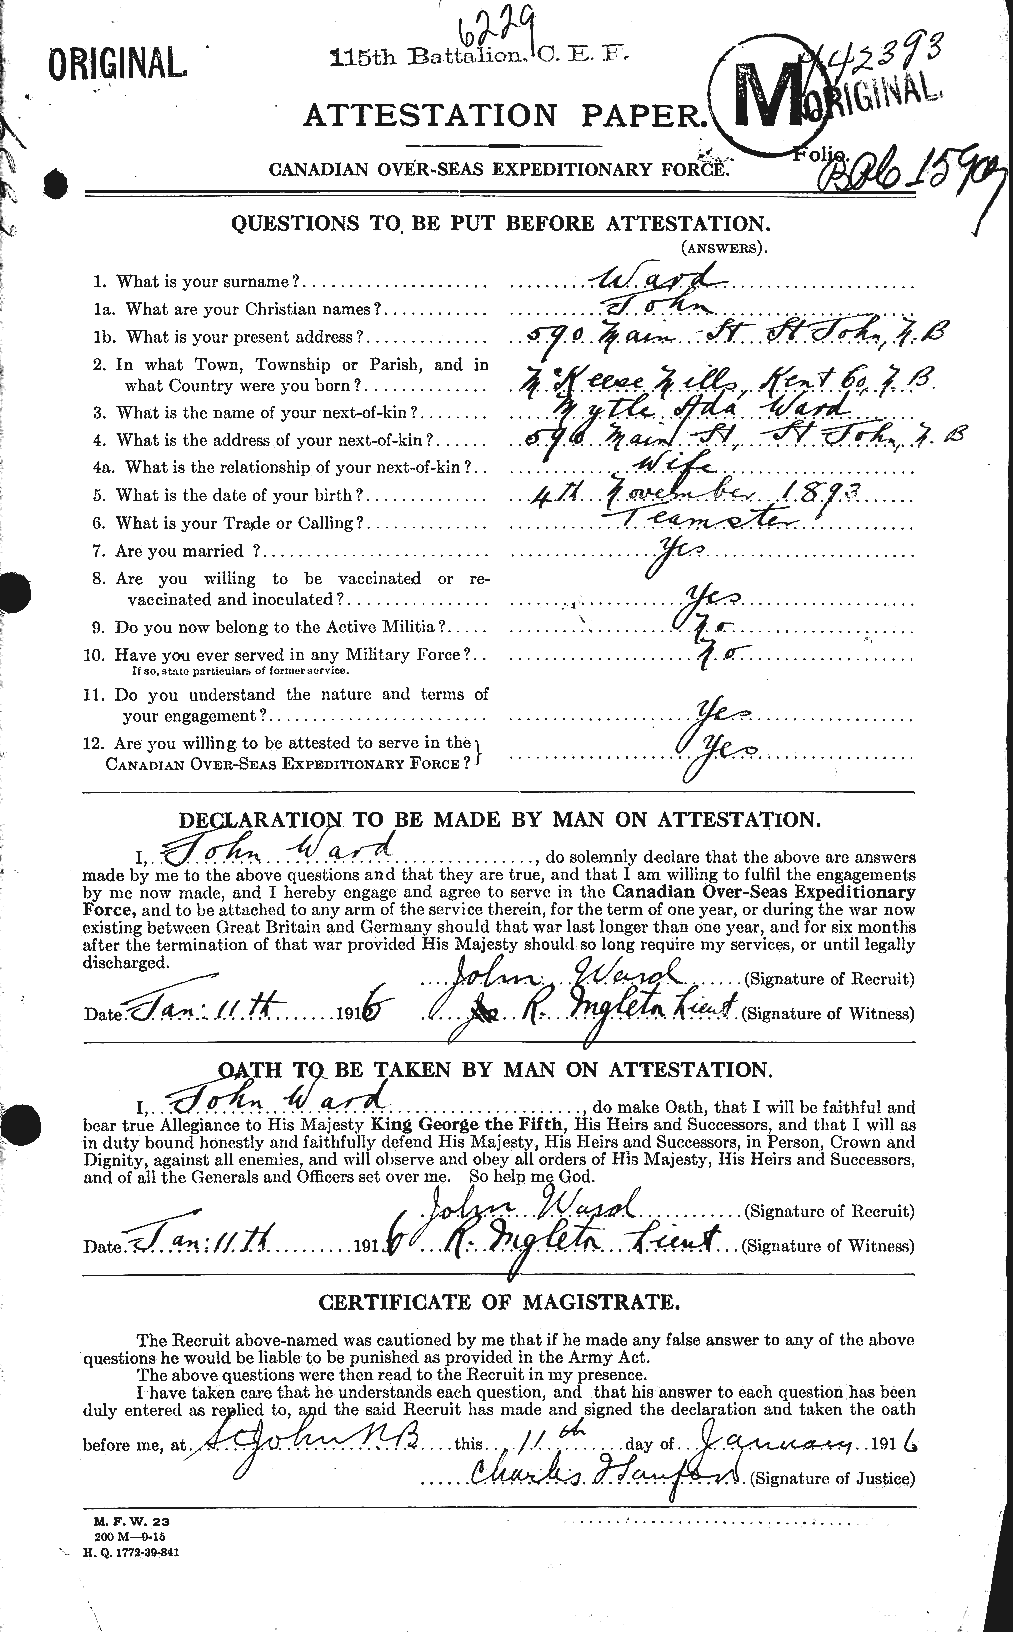 Personnel Records of the First World War - CEF 657927a